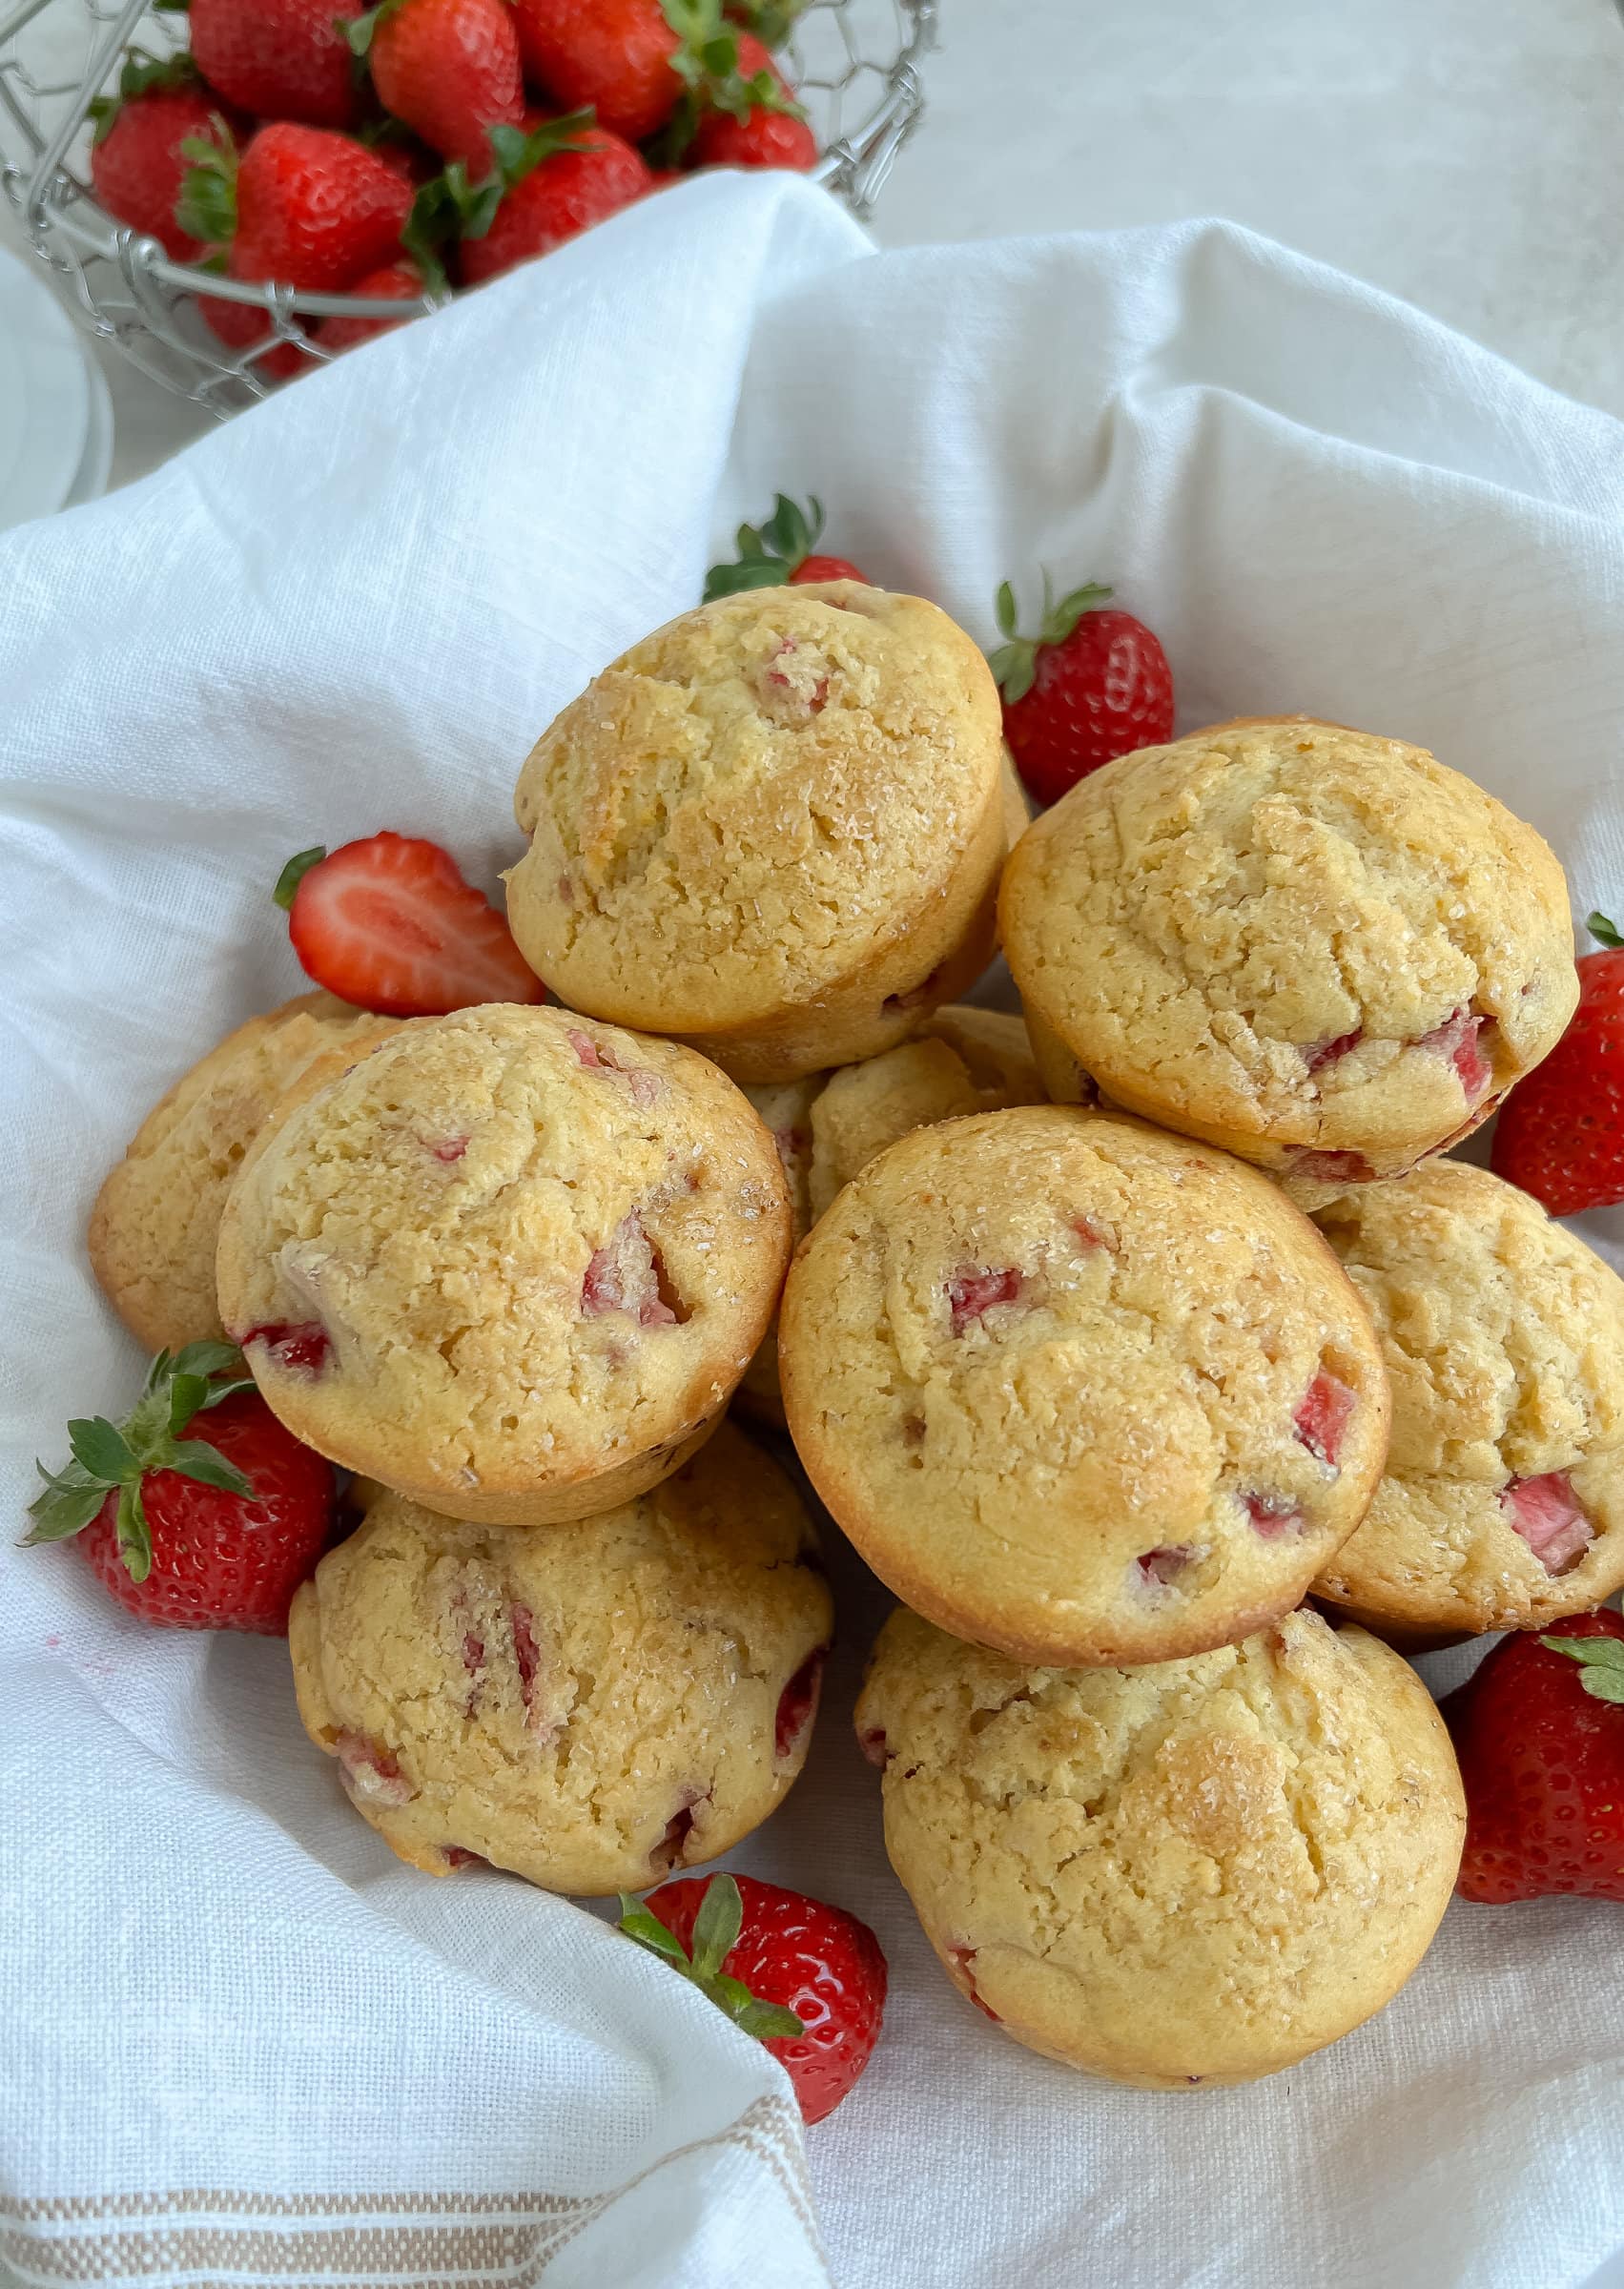 Basket of strawberry muffins ready for the table.